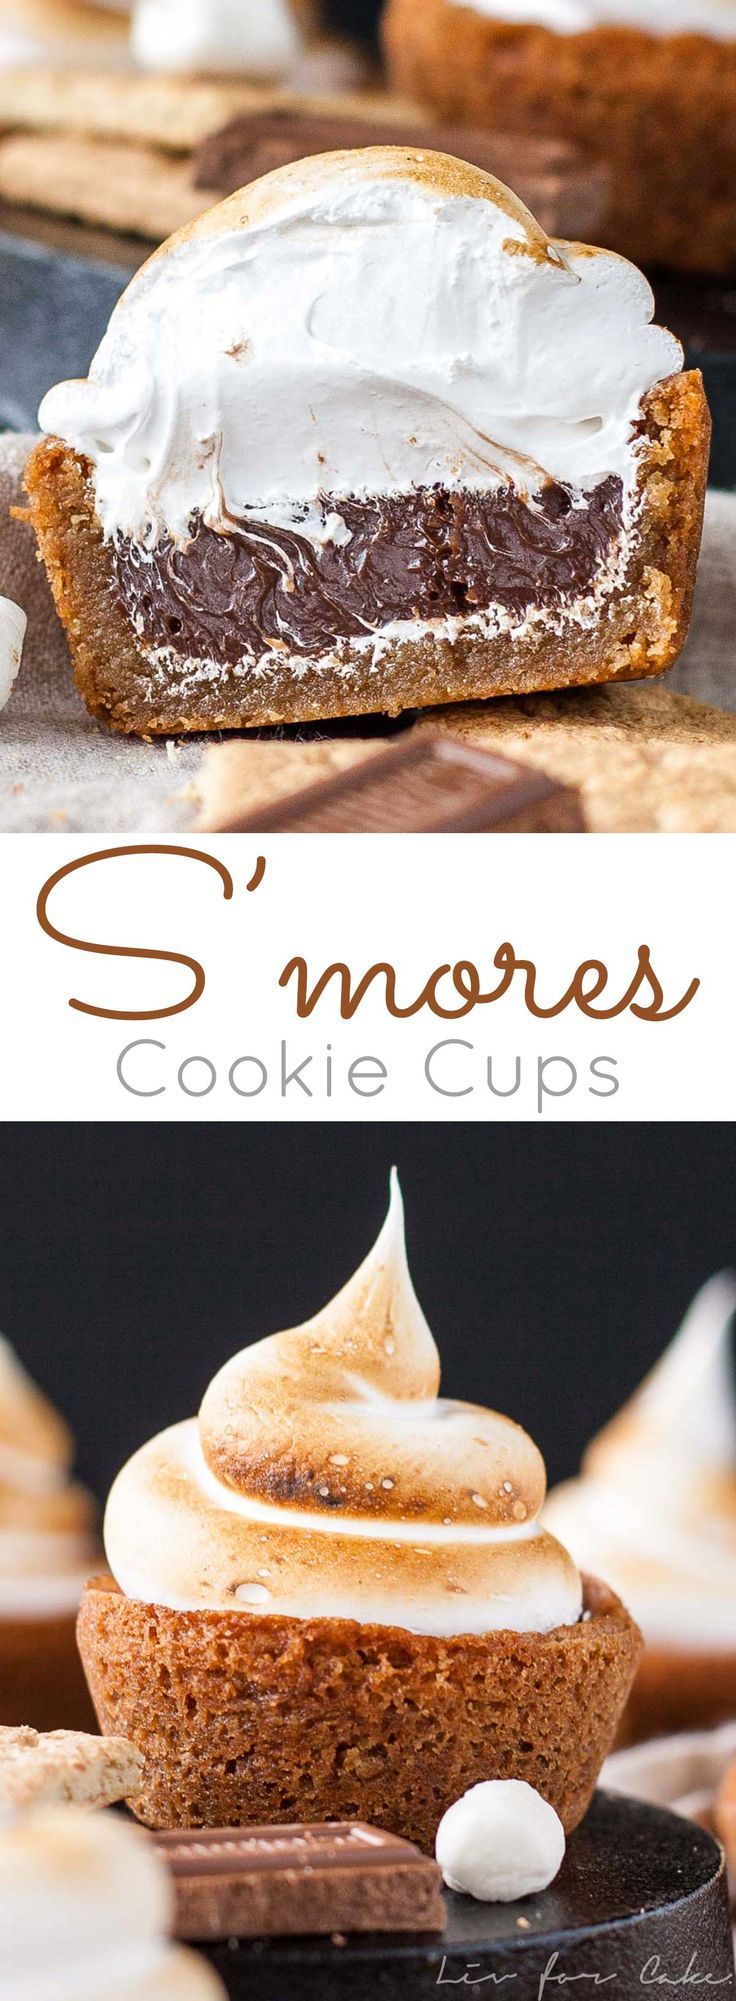 No campfire needed for these S’mores Cookie Cups! Graham cracker cookie cups filled with a Hershey’s milk chocolate ganache,